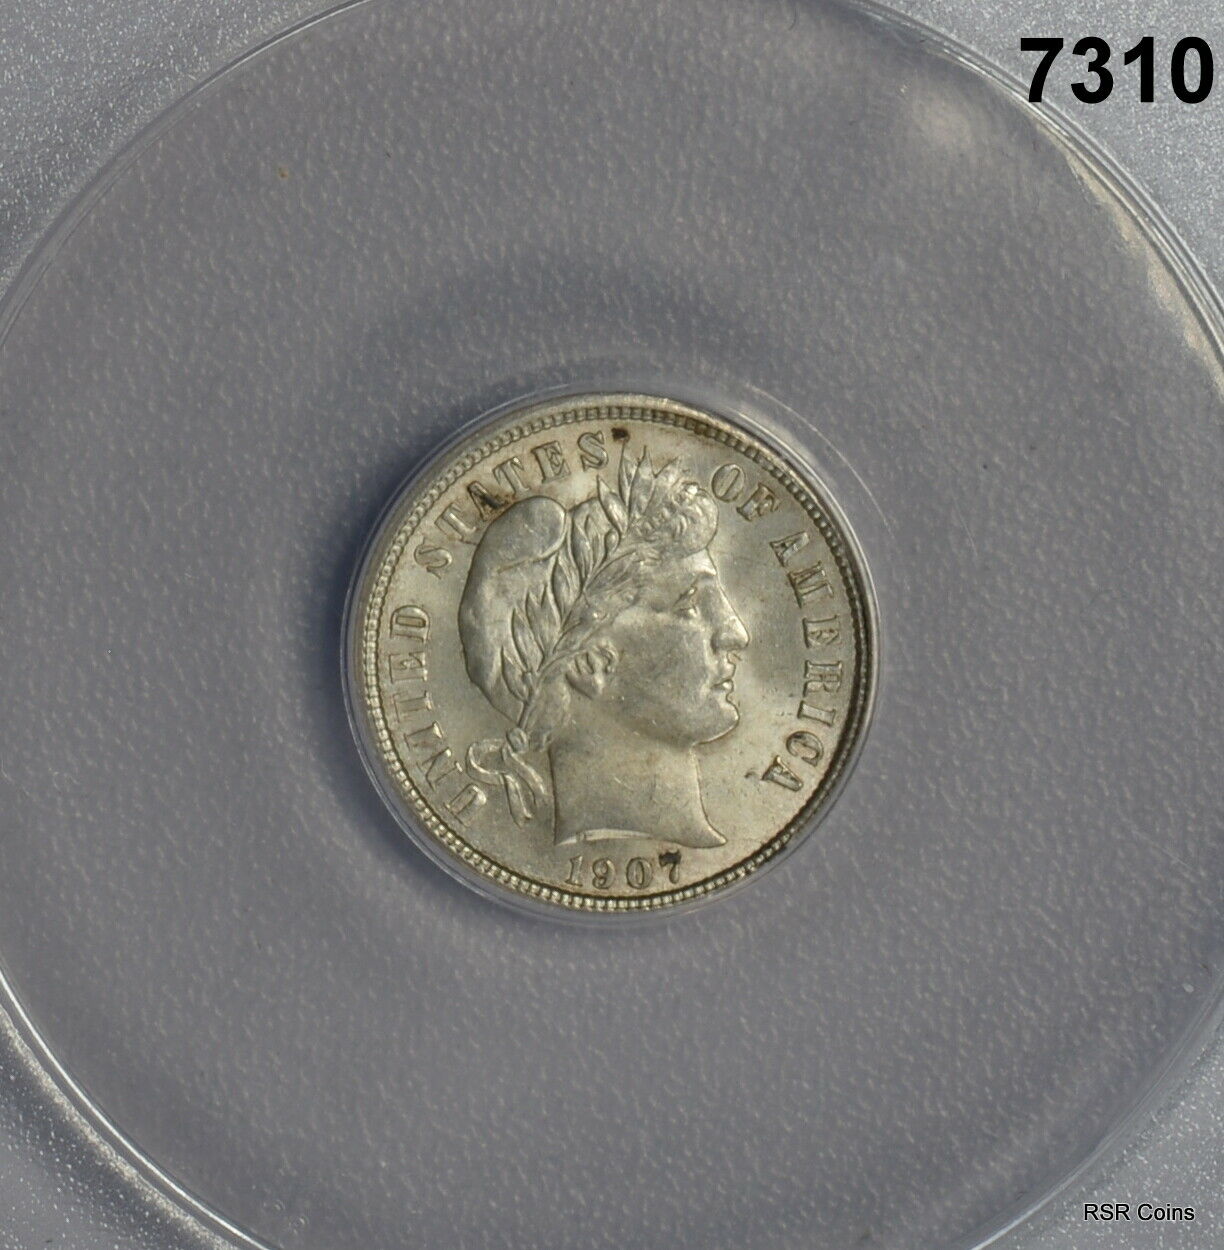 1907 BARBER DIME FROSTY ANACS CERTIFIED MS62 #7310